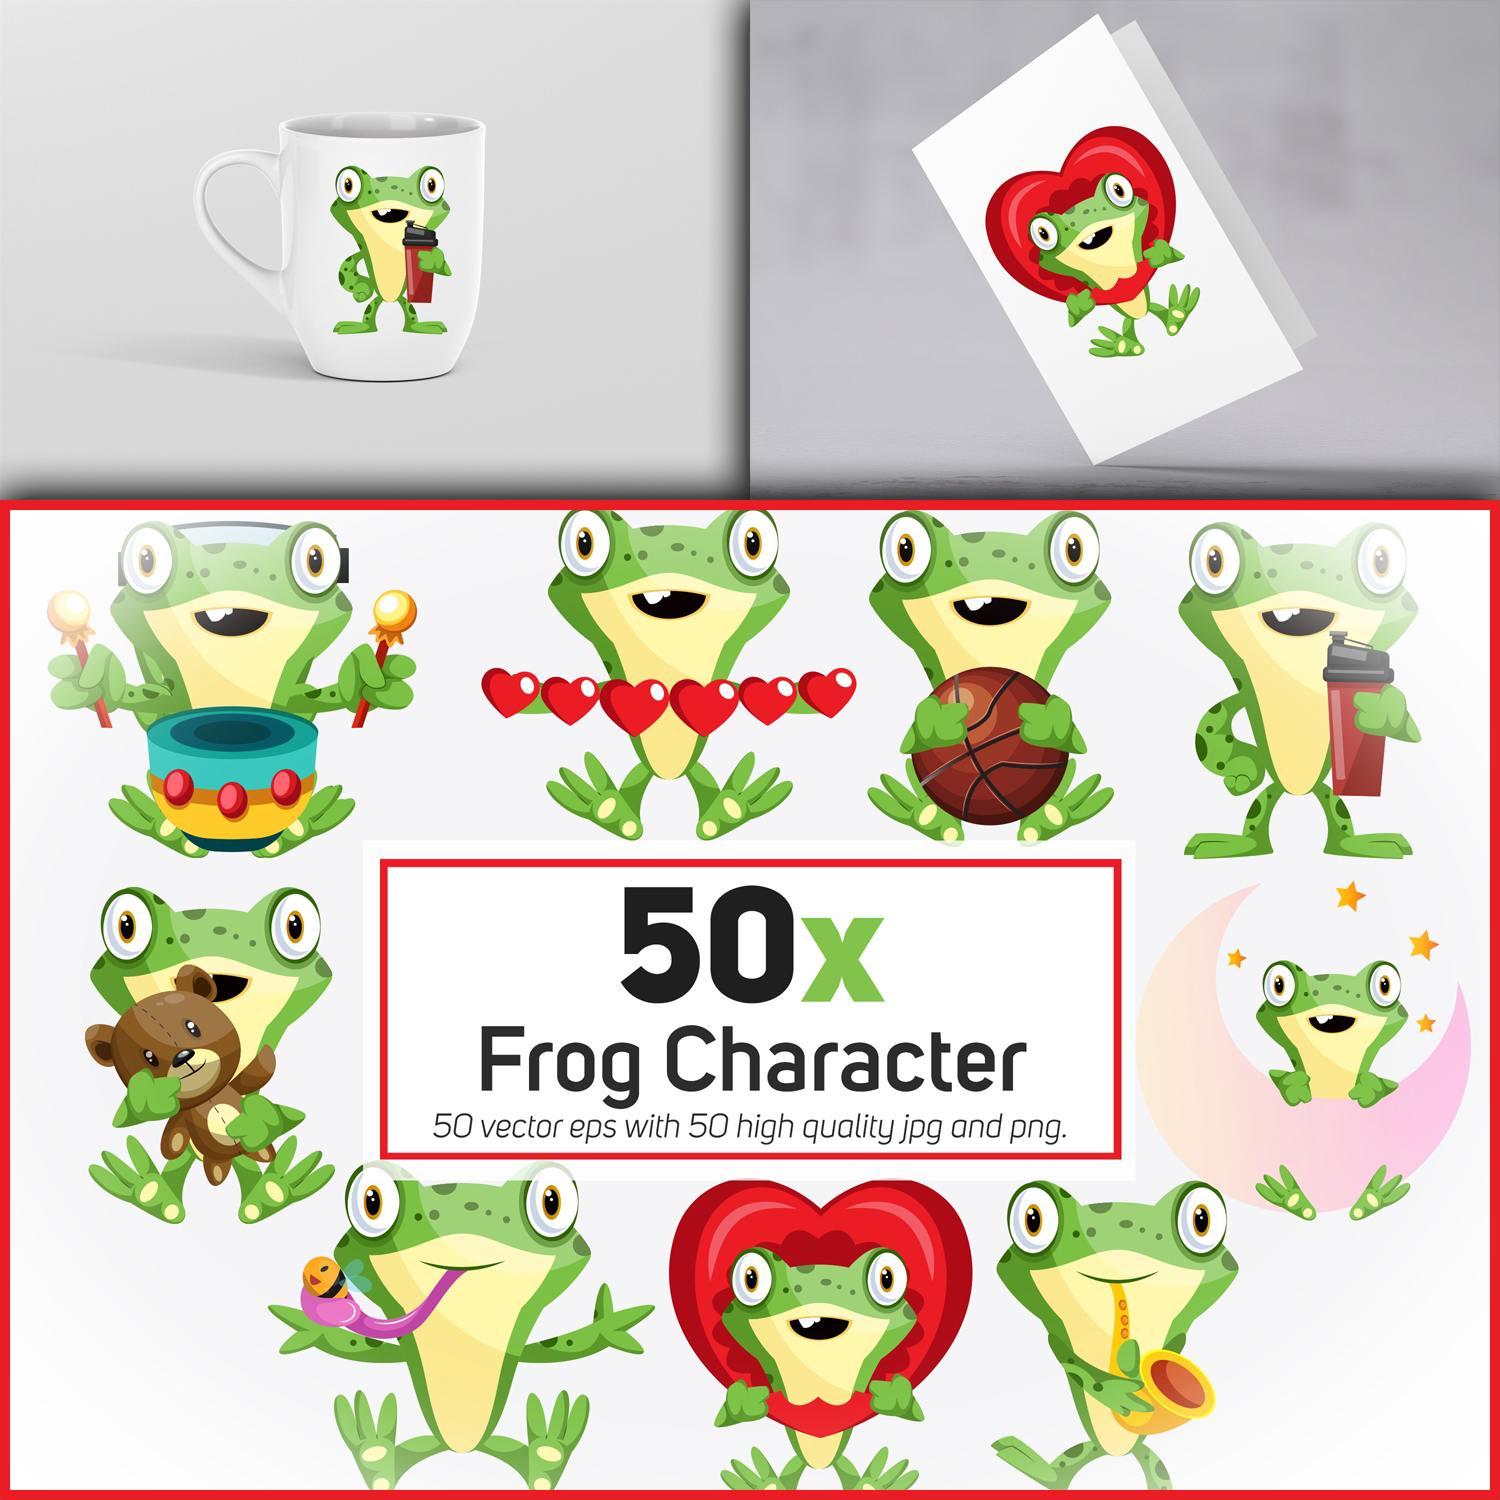 50x Frog Character in different situation collection cover.